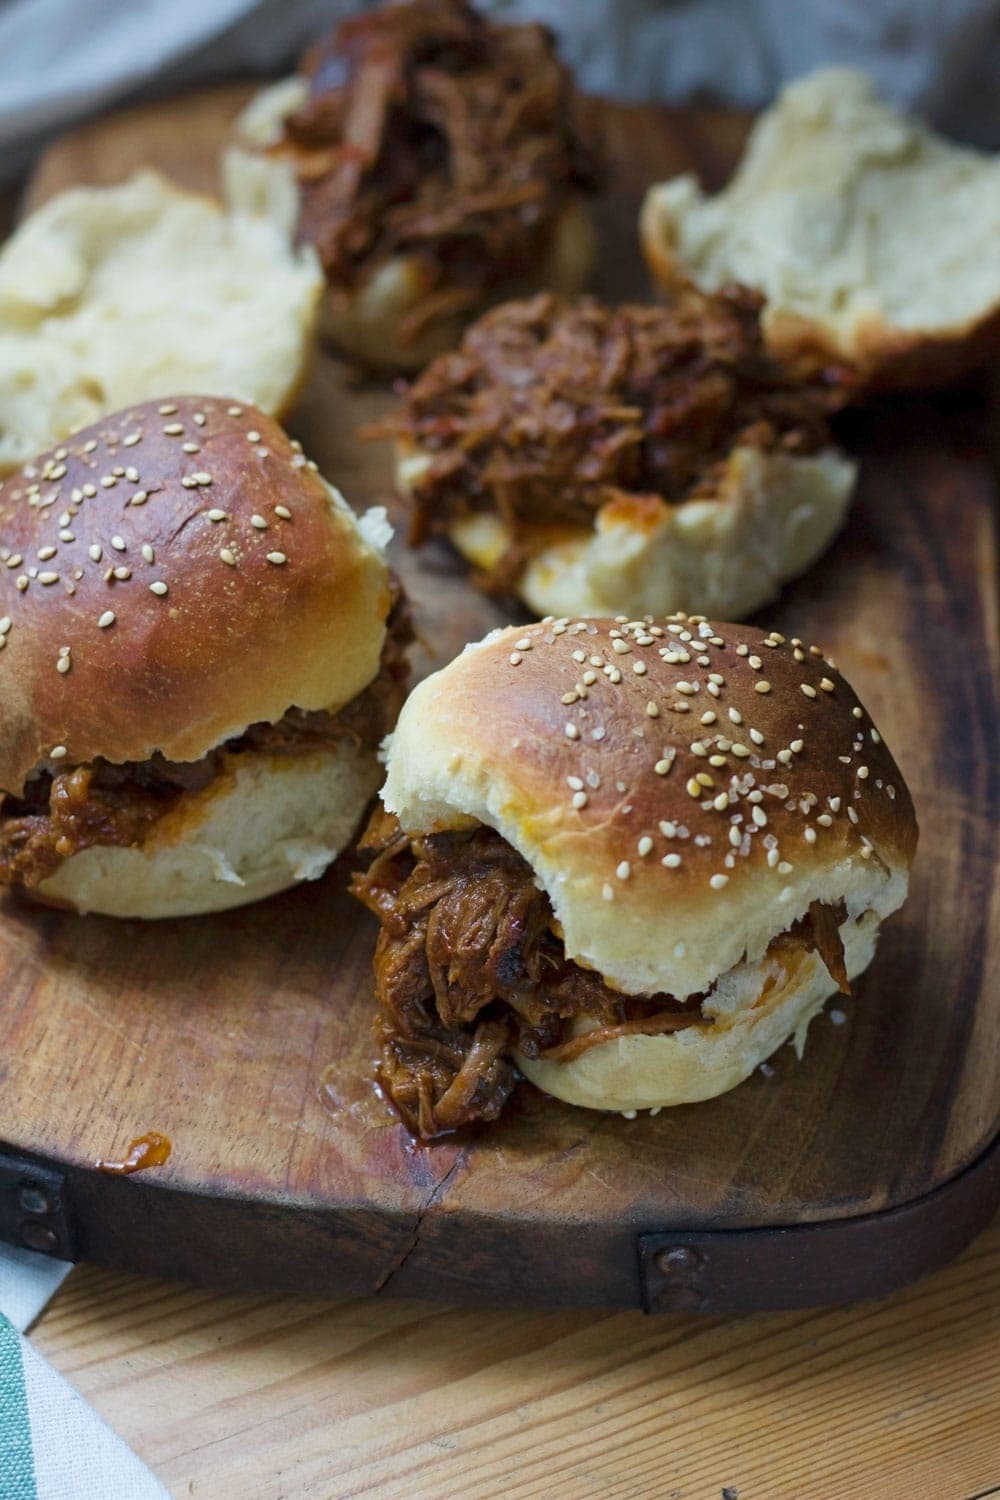 Beef brisket is slow cooked until meltingly tender for this spicy slow cooker pulled brisket. Serve in rolls or wraps for a delicious dinner!